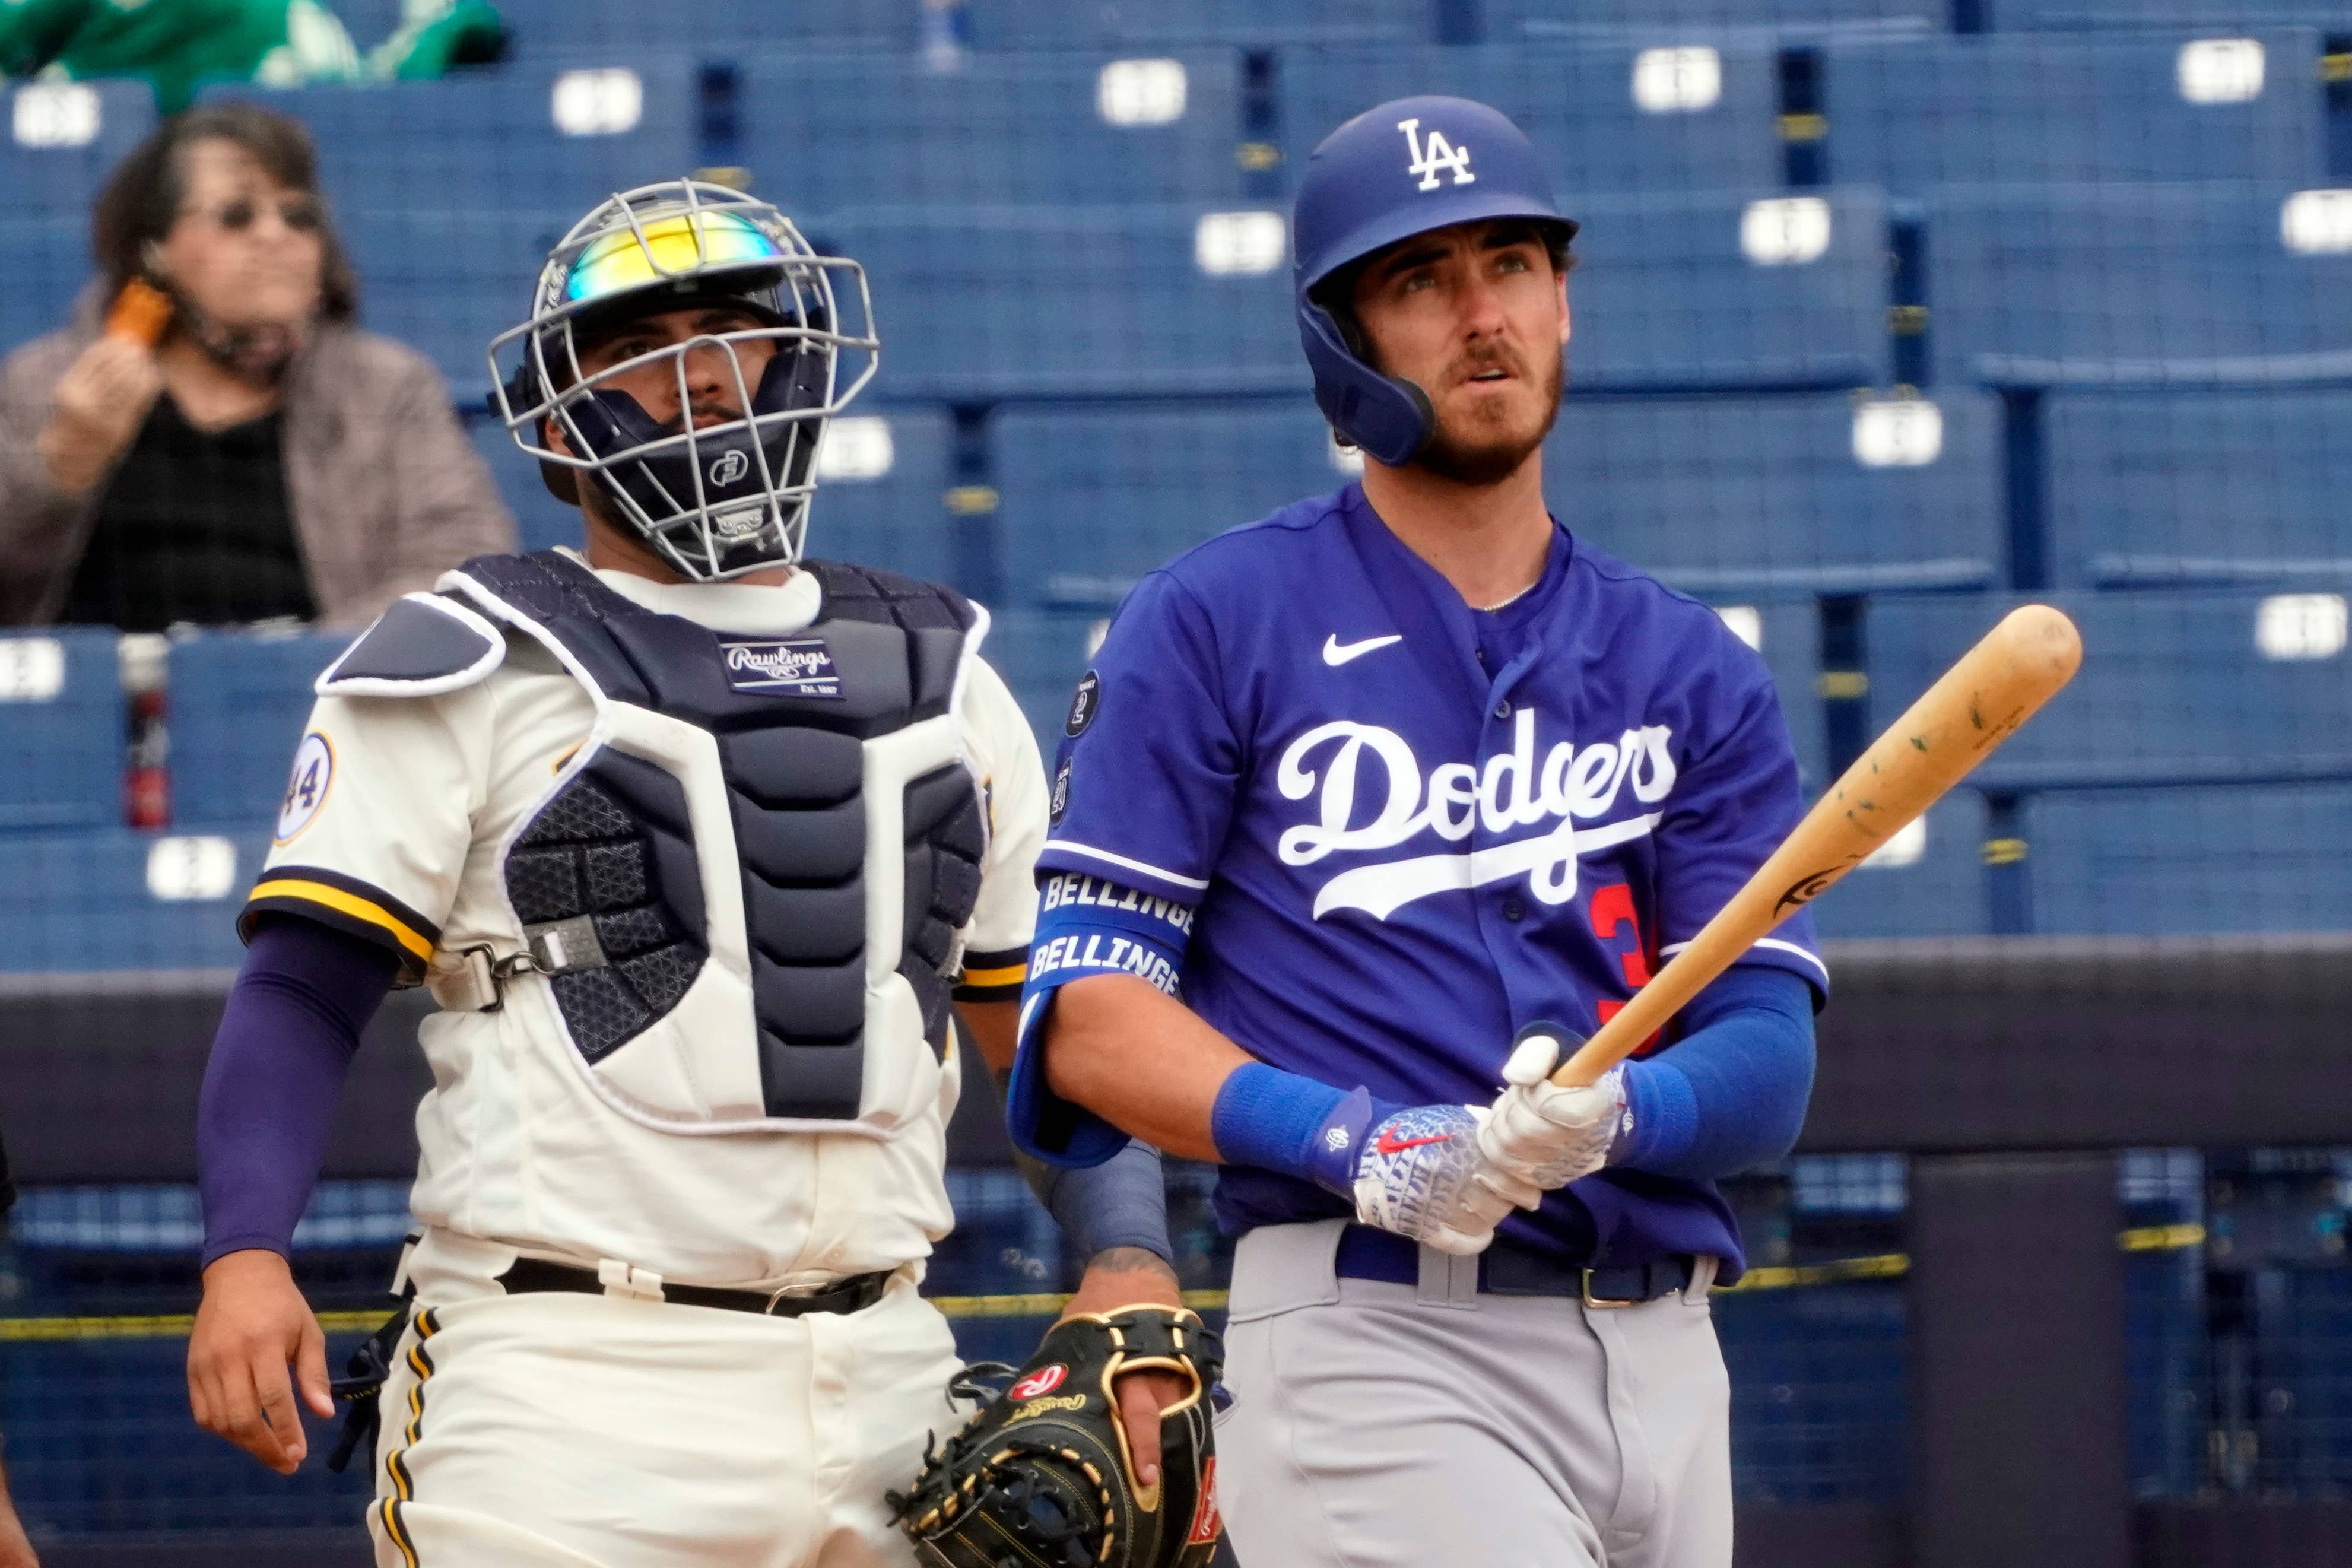 Cody Bellinger Dodgers Brewers Spring Training 1 2021